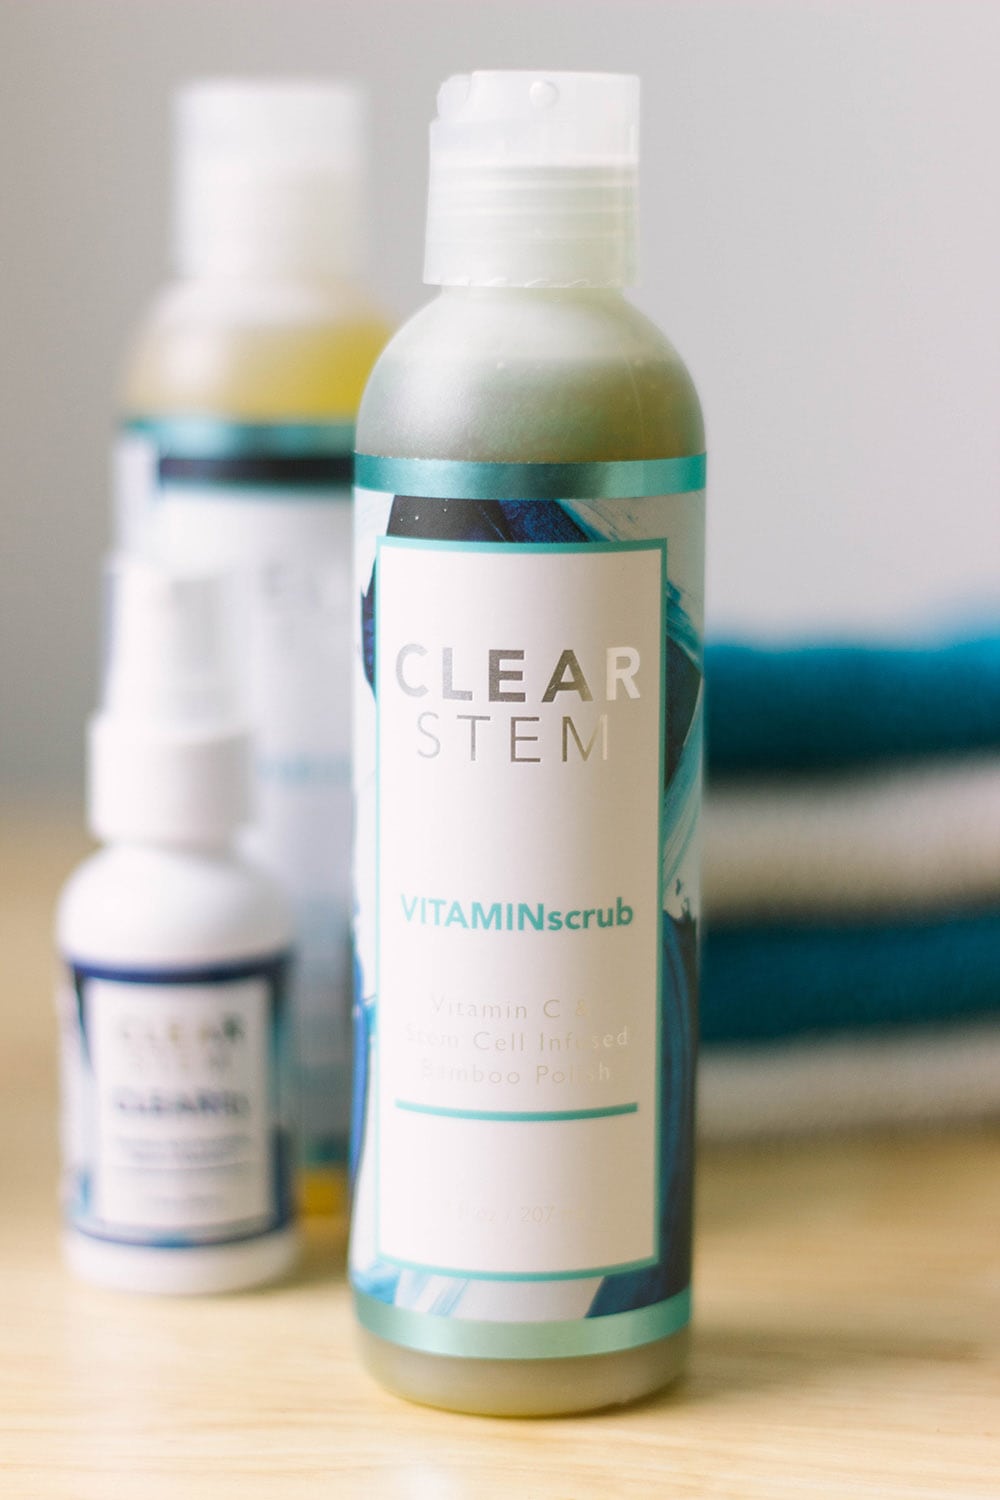 clearstem skin care products